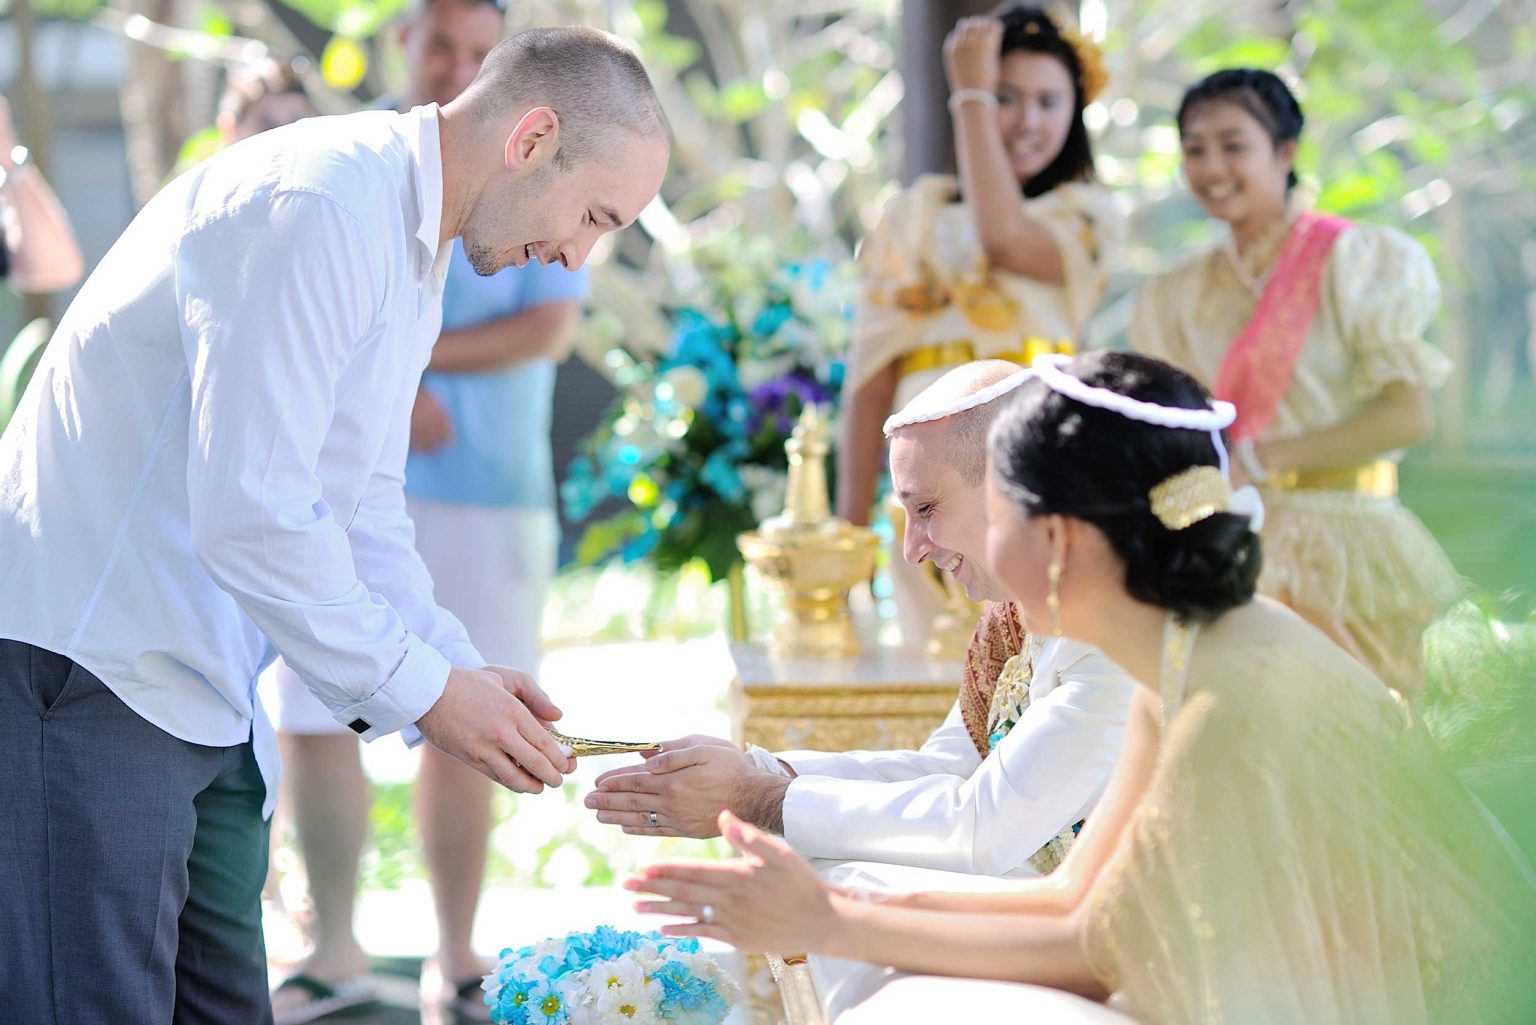 Presenting our stunning ceremony packages, as you embark on a journey of love and celebration.